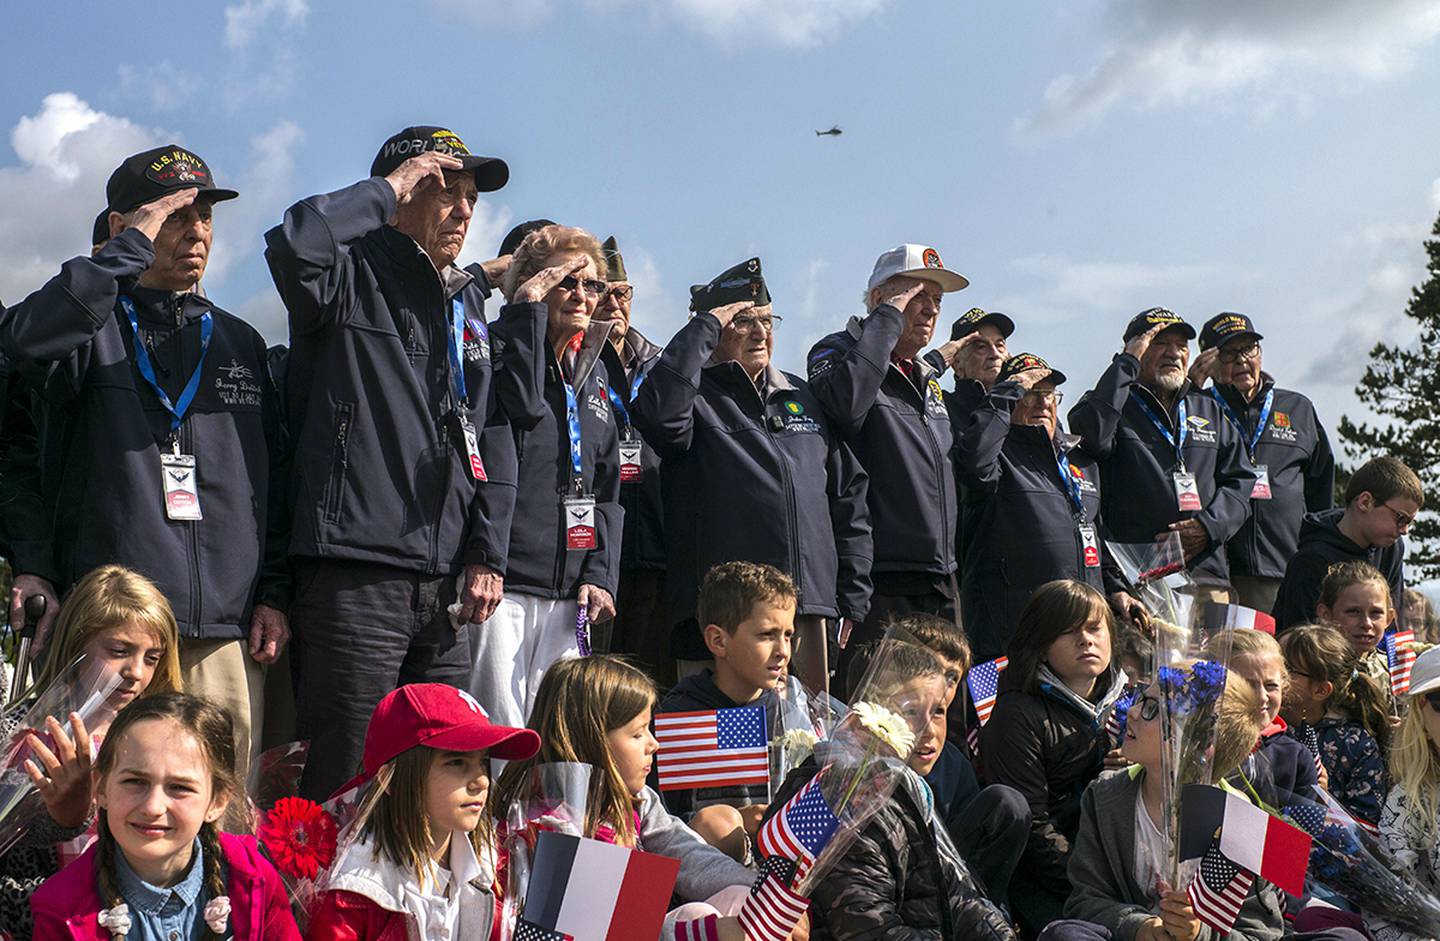 World War II veterans from the United States salute as they pose with local school children at the Normandy American Cemetery in Colleville-sur-Mer, Normandy, France